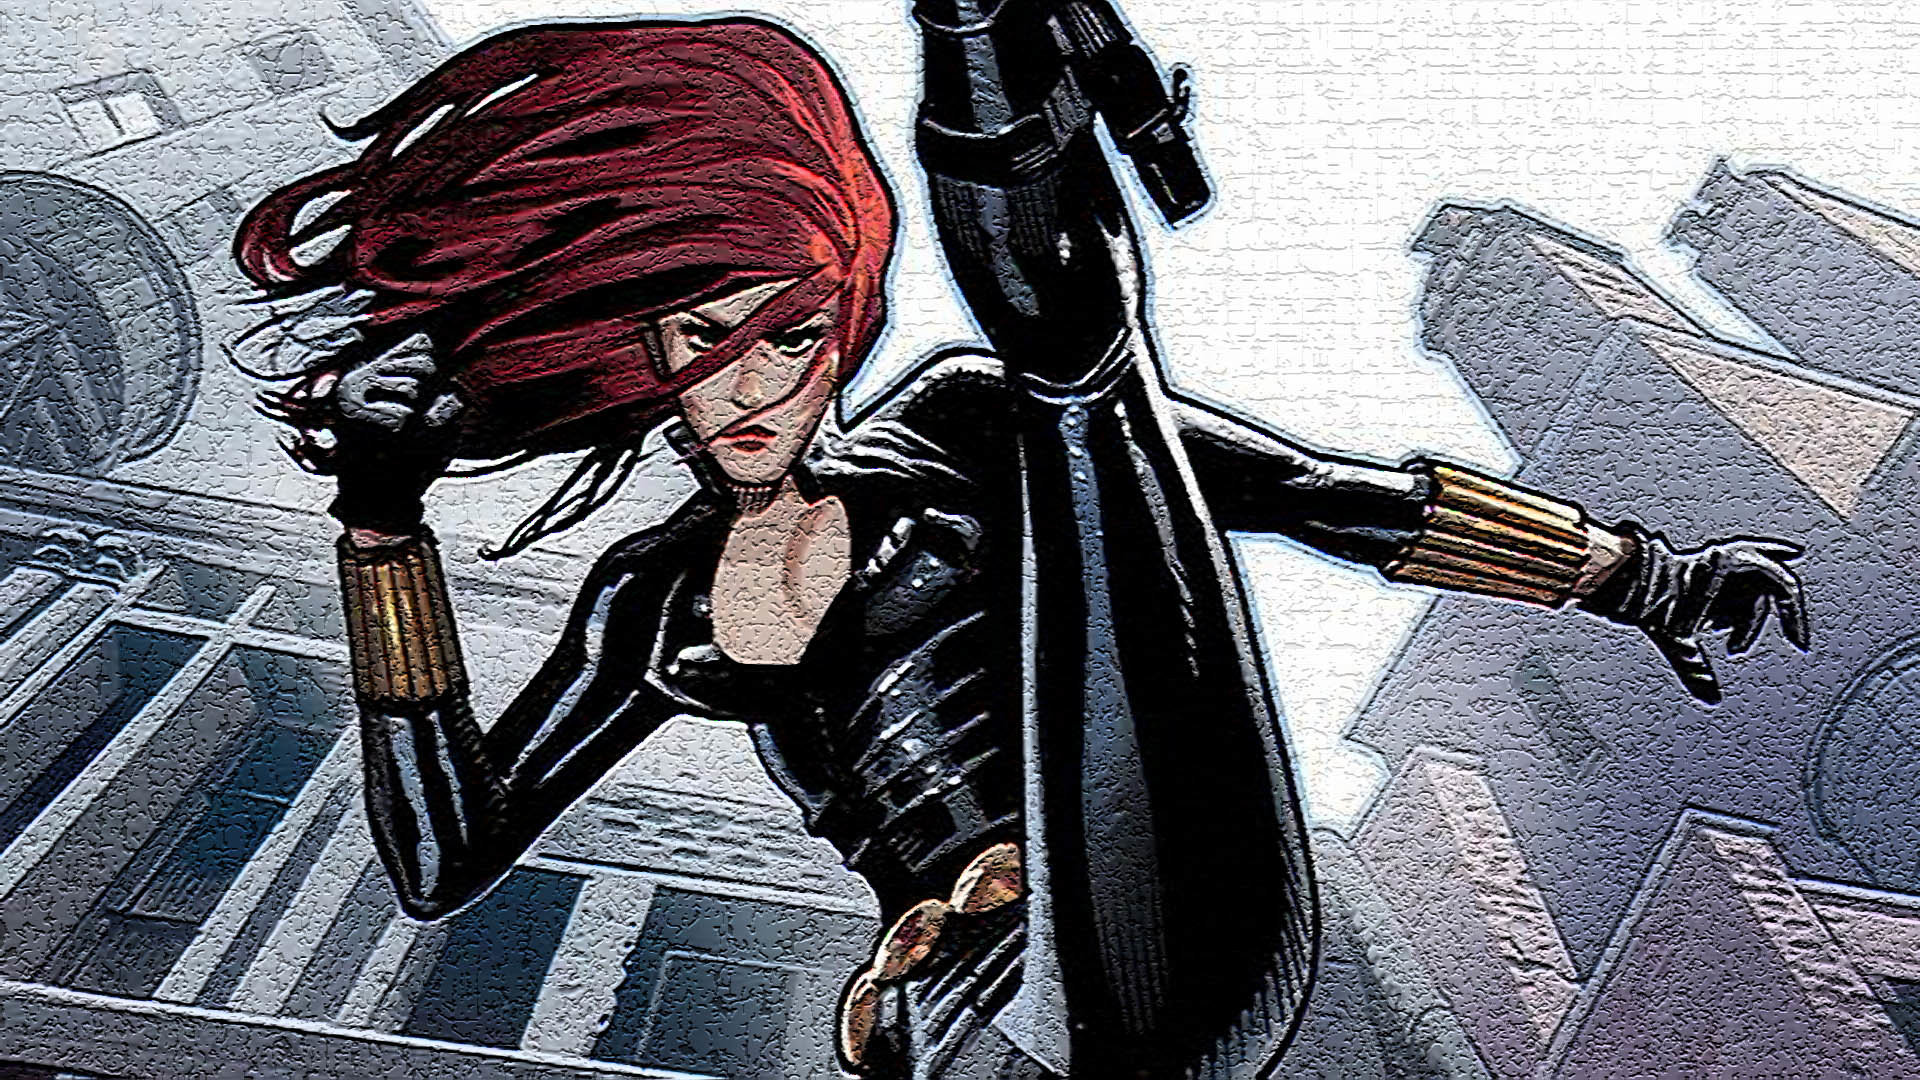 Download 1080p Black Widow PC background ID:278390 for free